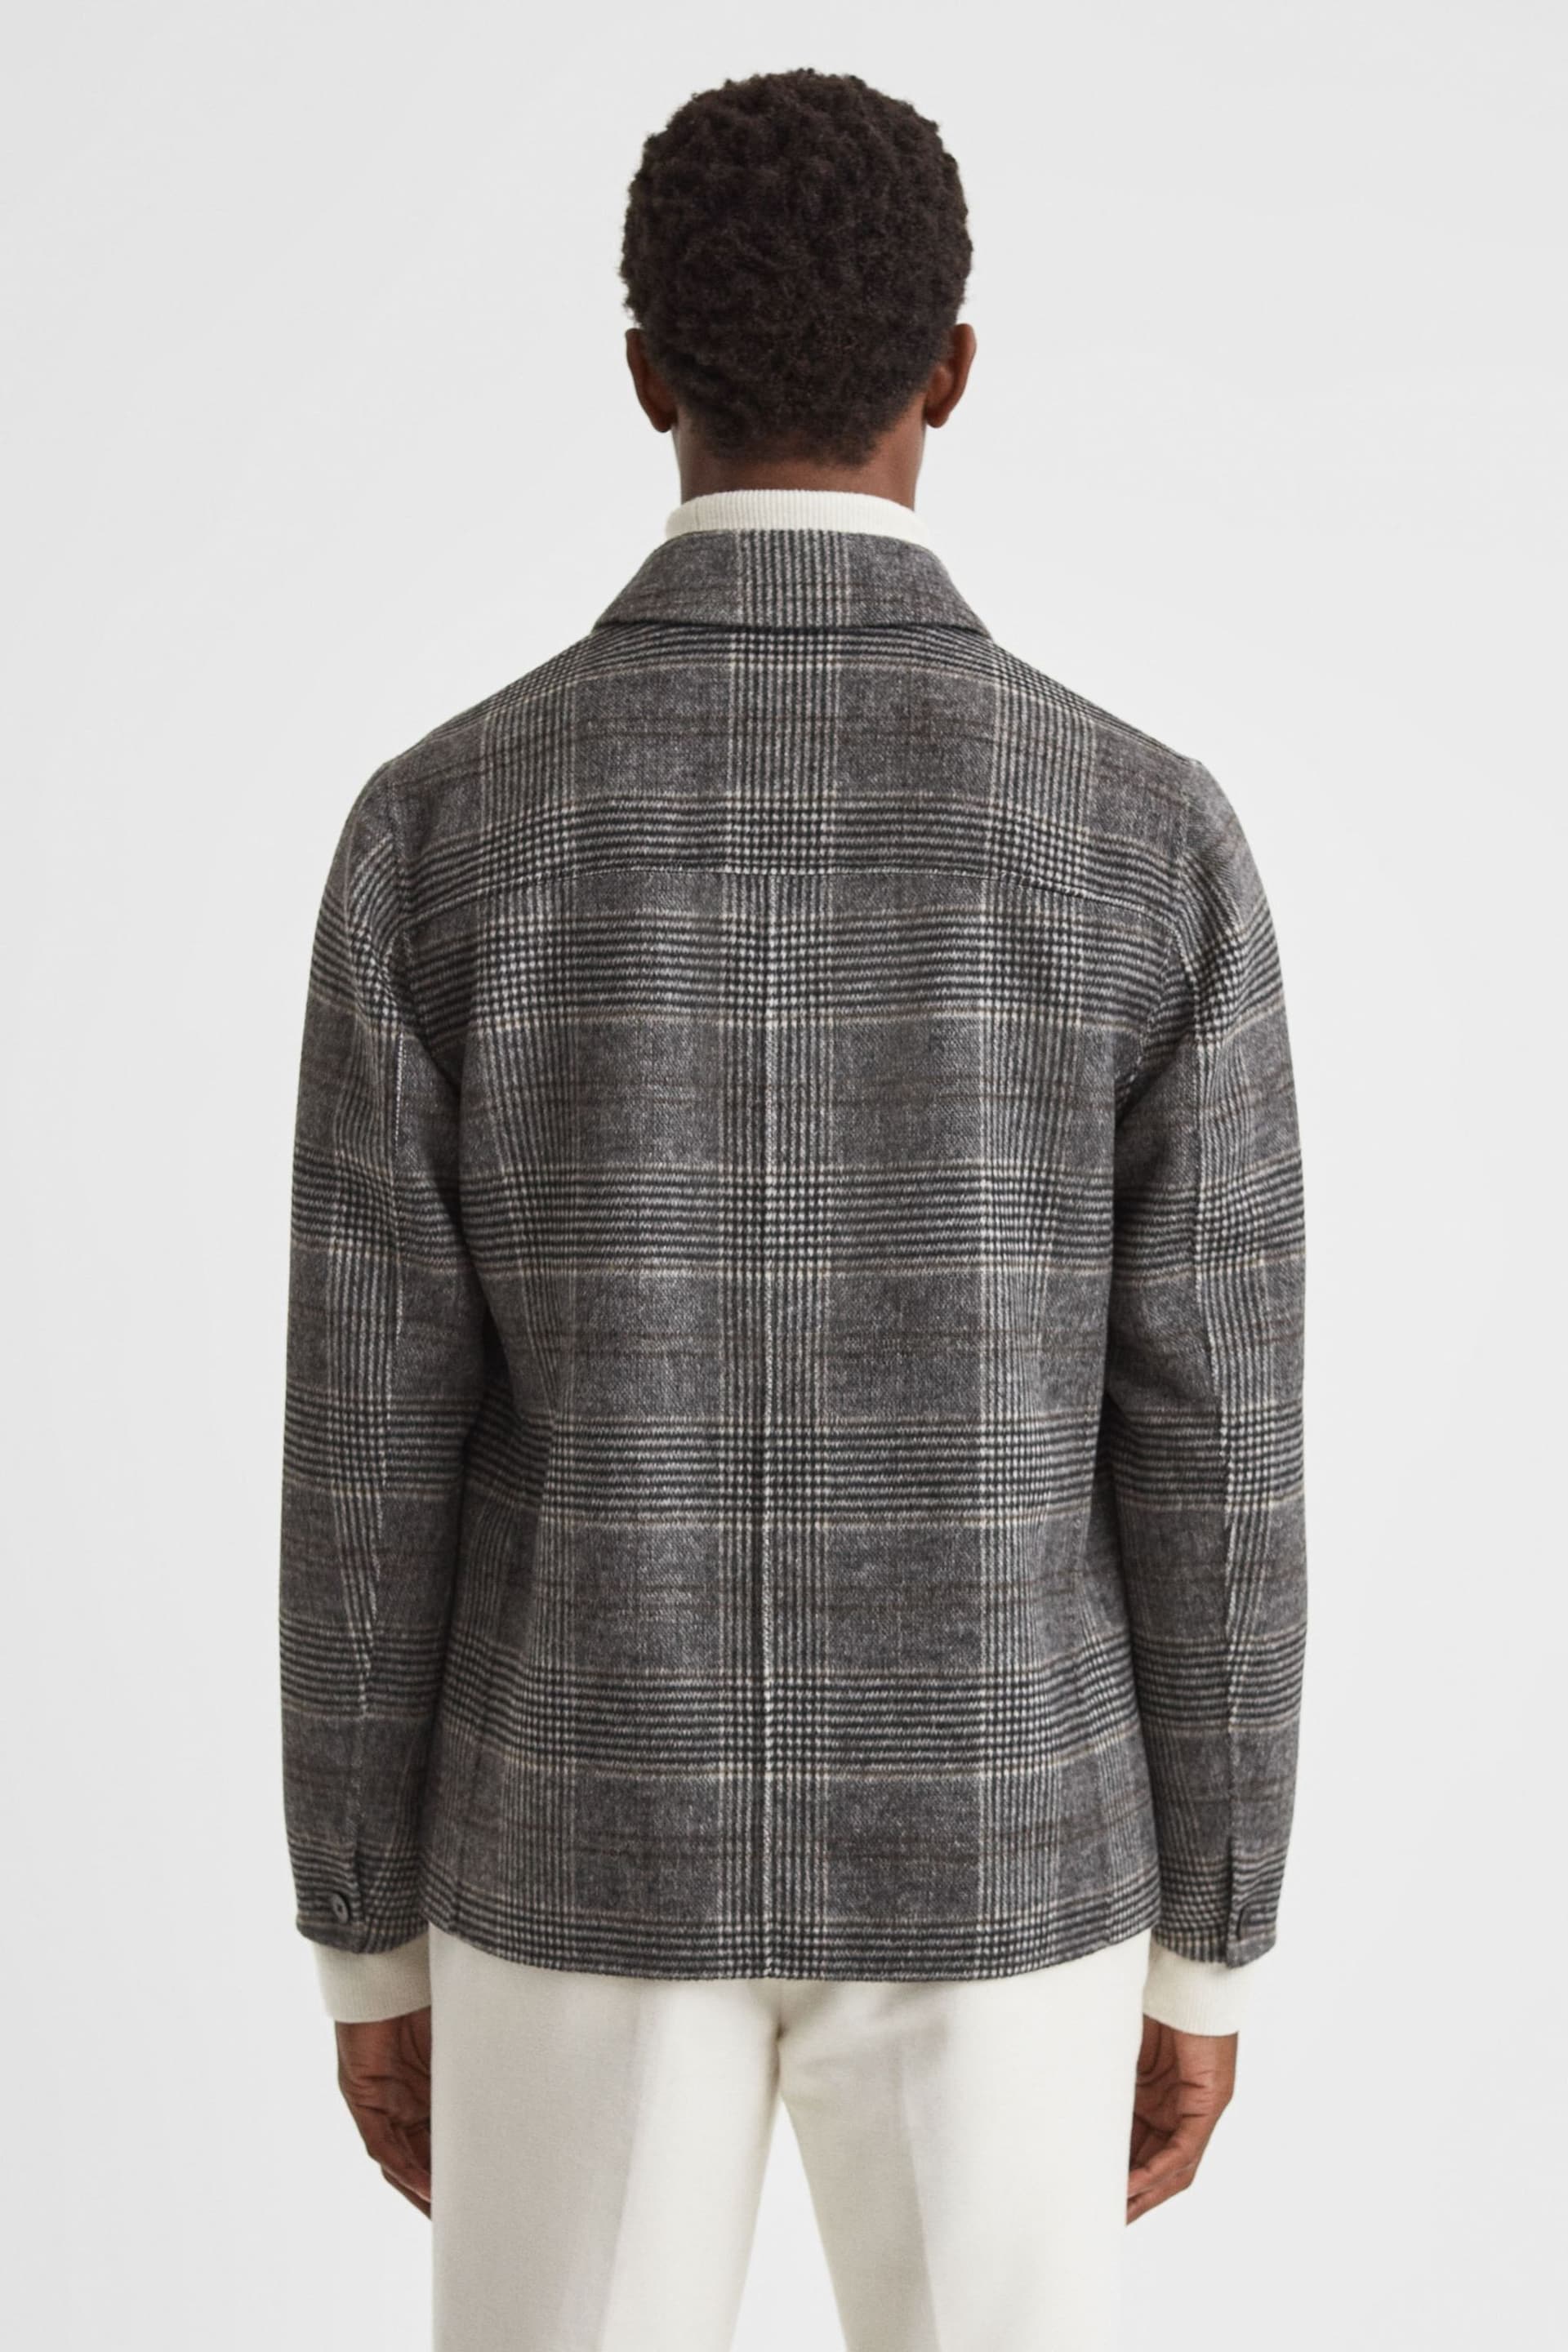 Reiss Charcoal Covert Wool Blend Check Overshirt - Image 5 of 5